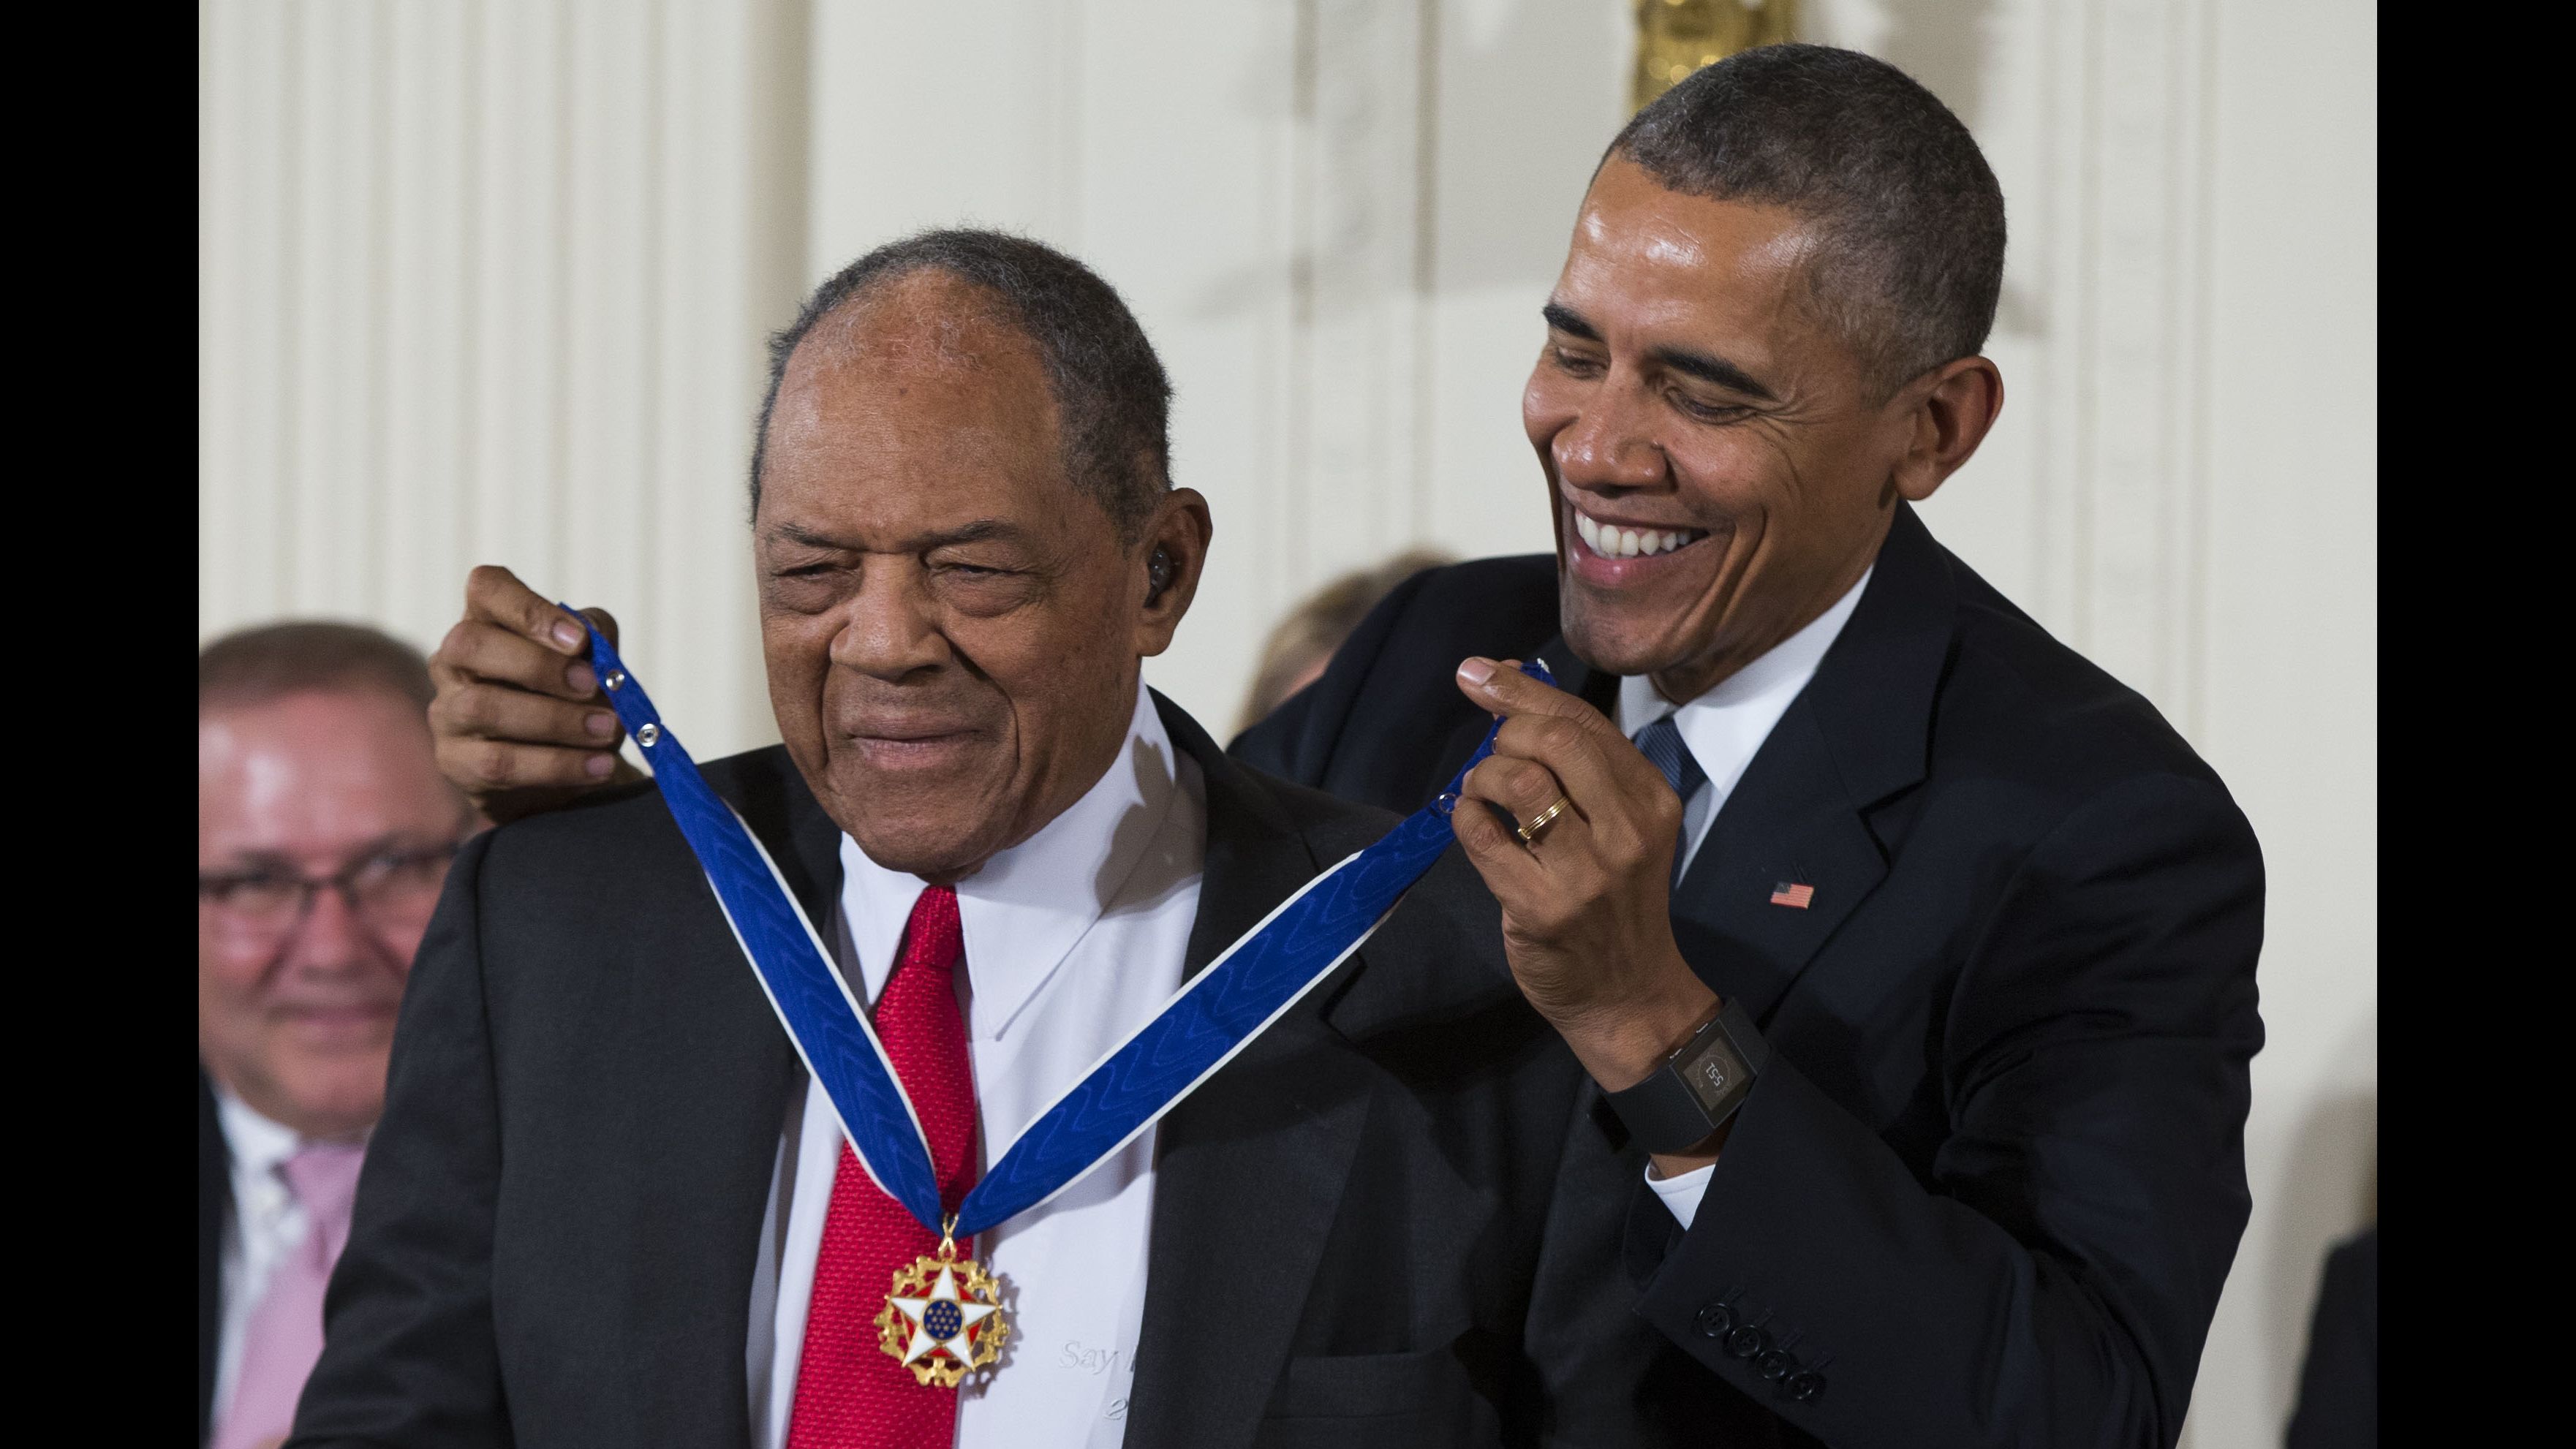 Baseball Hall of Famer Willie Mays, left, receives the Presidential Medal of Freedom from President Barack Obama during a ceremony in the East Room of the White House, on Tuesday, Nov. 24, 2015, in Washington. (AP Photo/Evan Vucci)